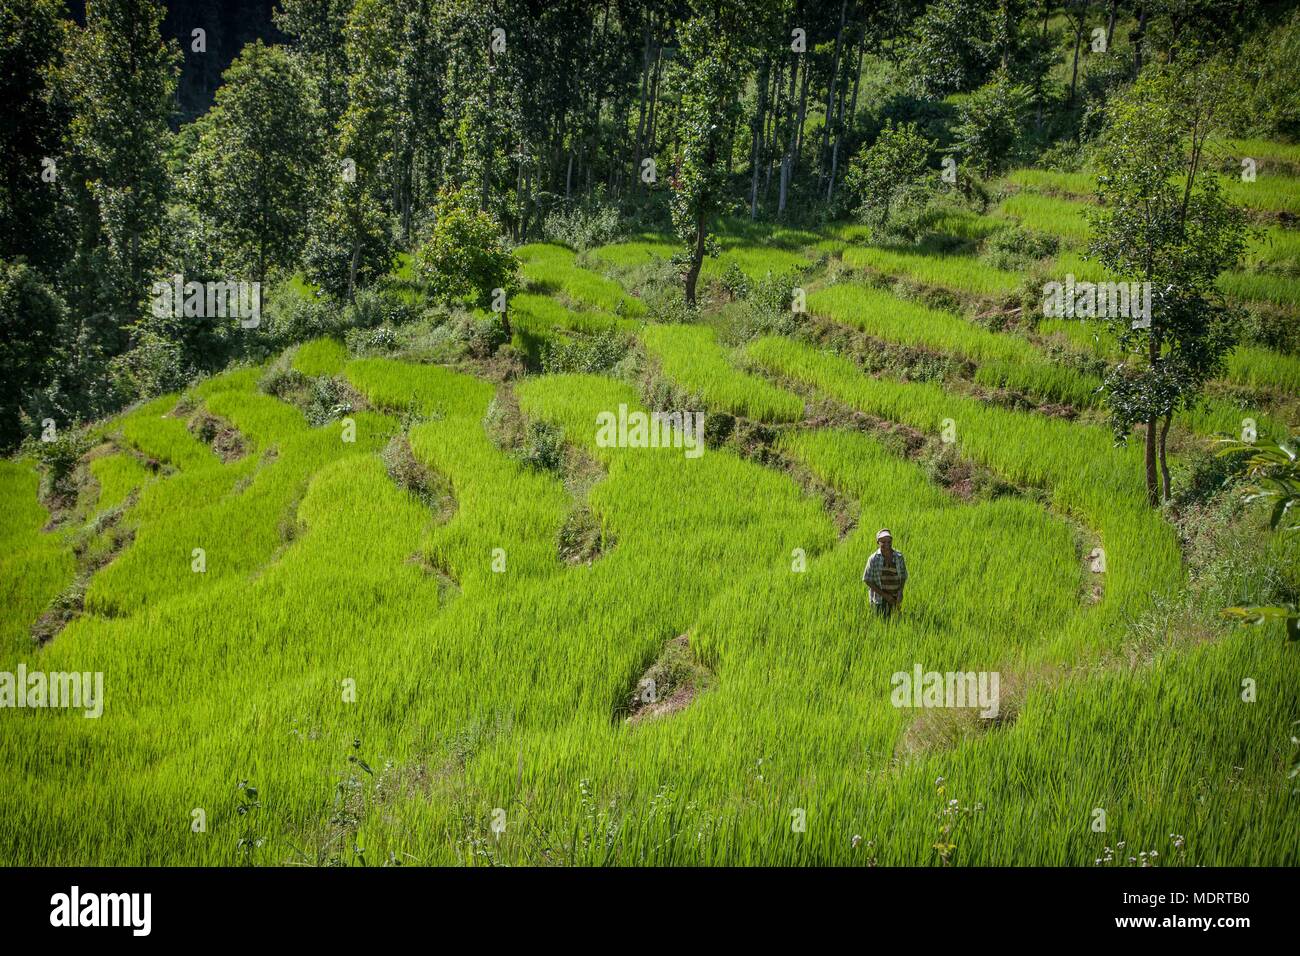 A rice farmer works amongst terraced paddy fields in the Dhading District of Nepal Stock Photo